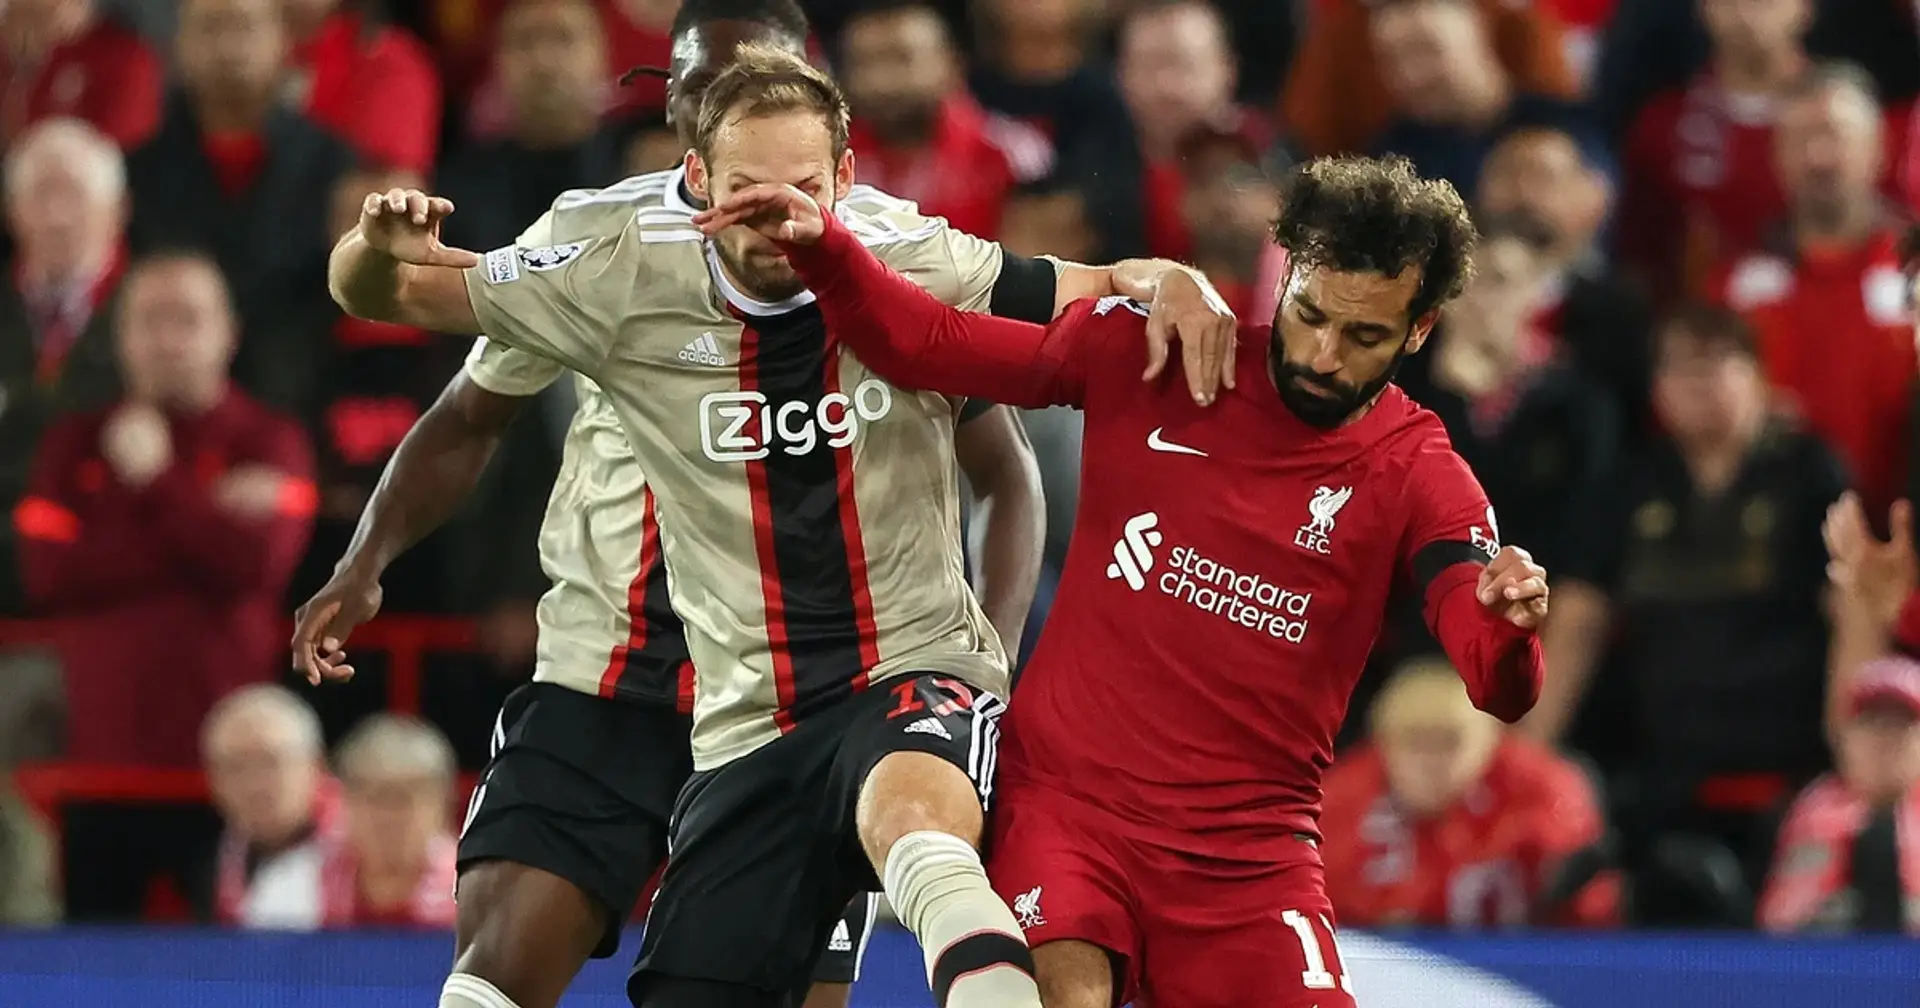 Trip to Netherlands up next: a look at Liverpool's following 5 fixtures